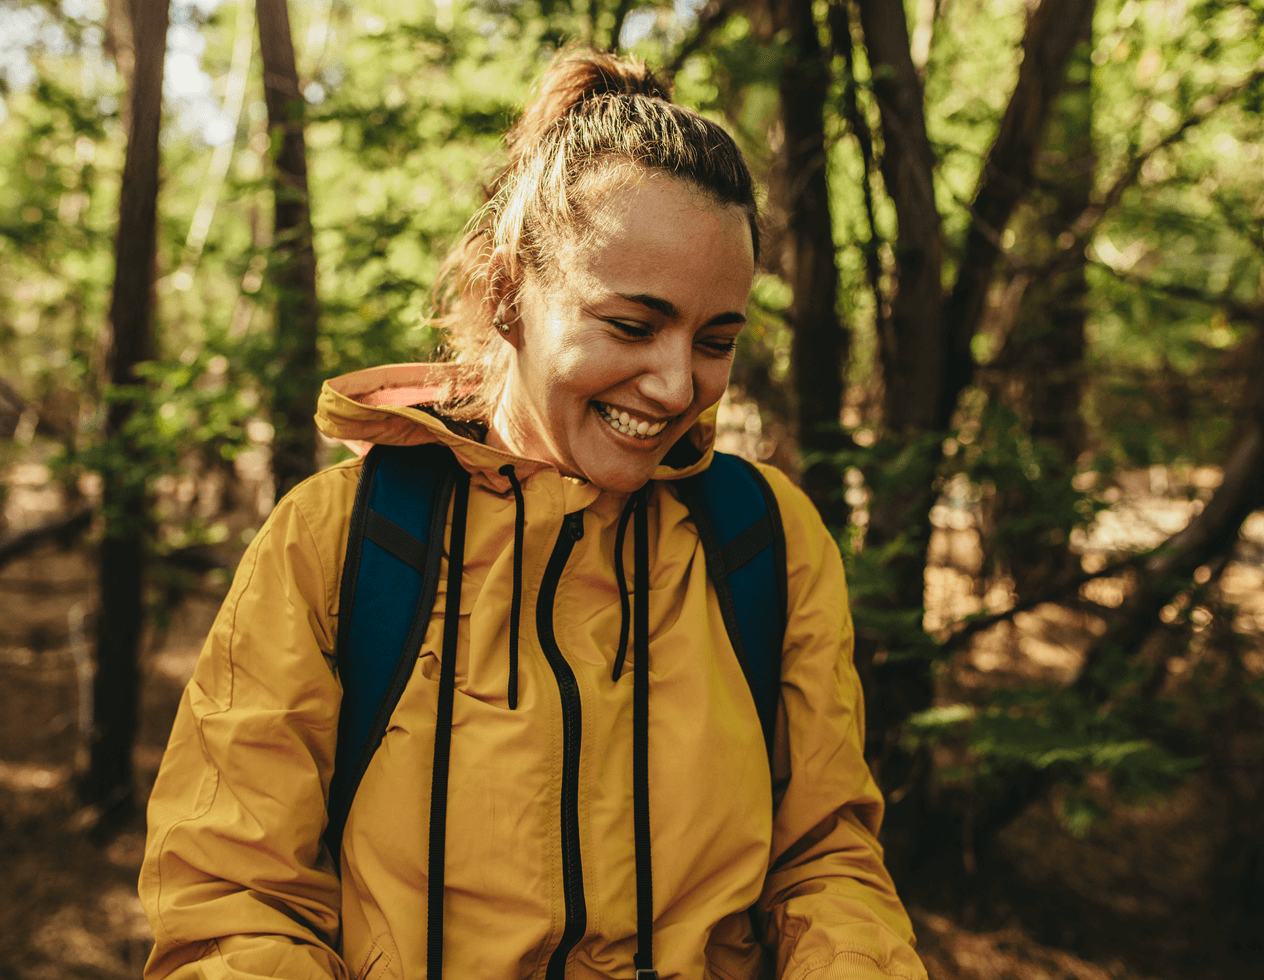 Smiling woman walking in the forest.